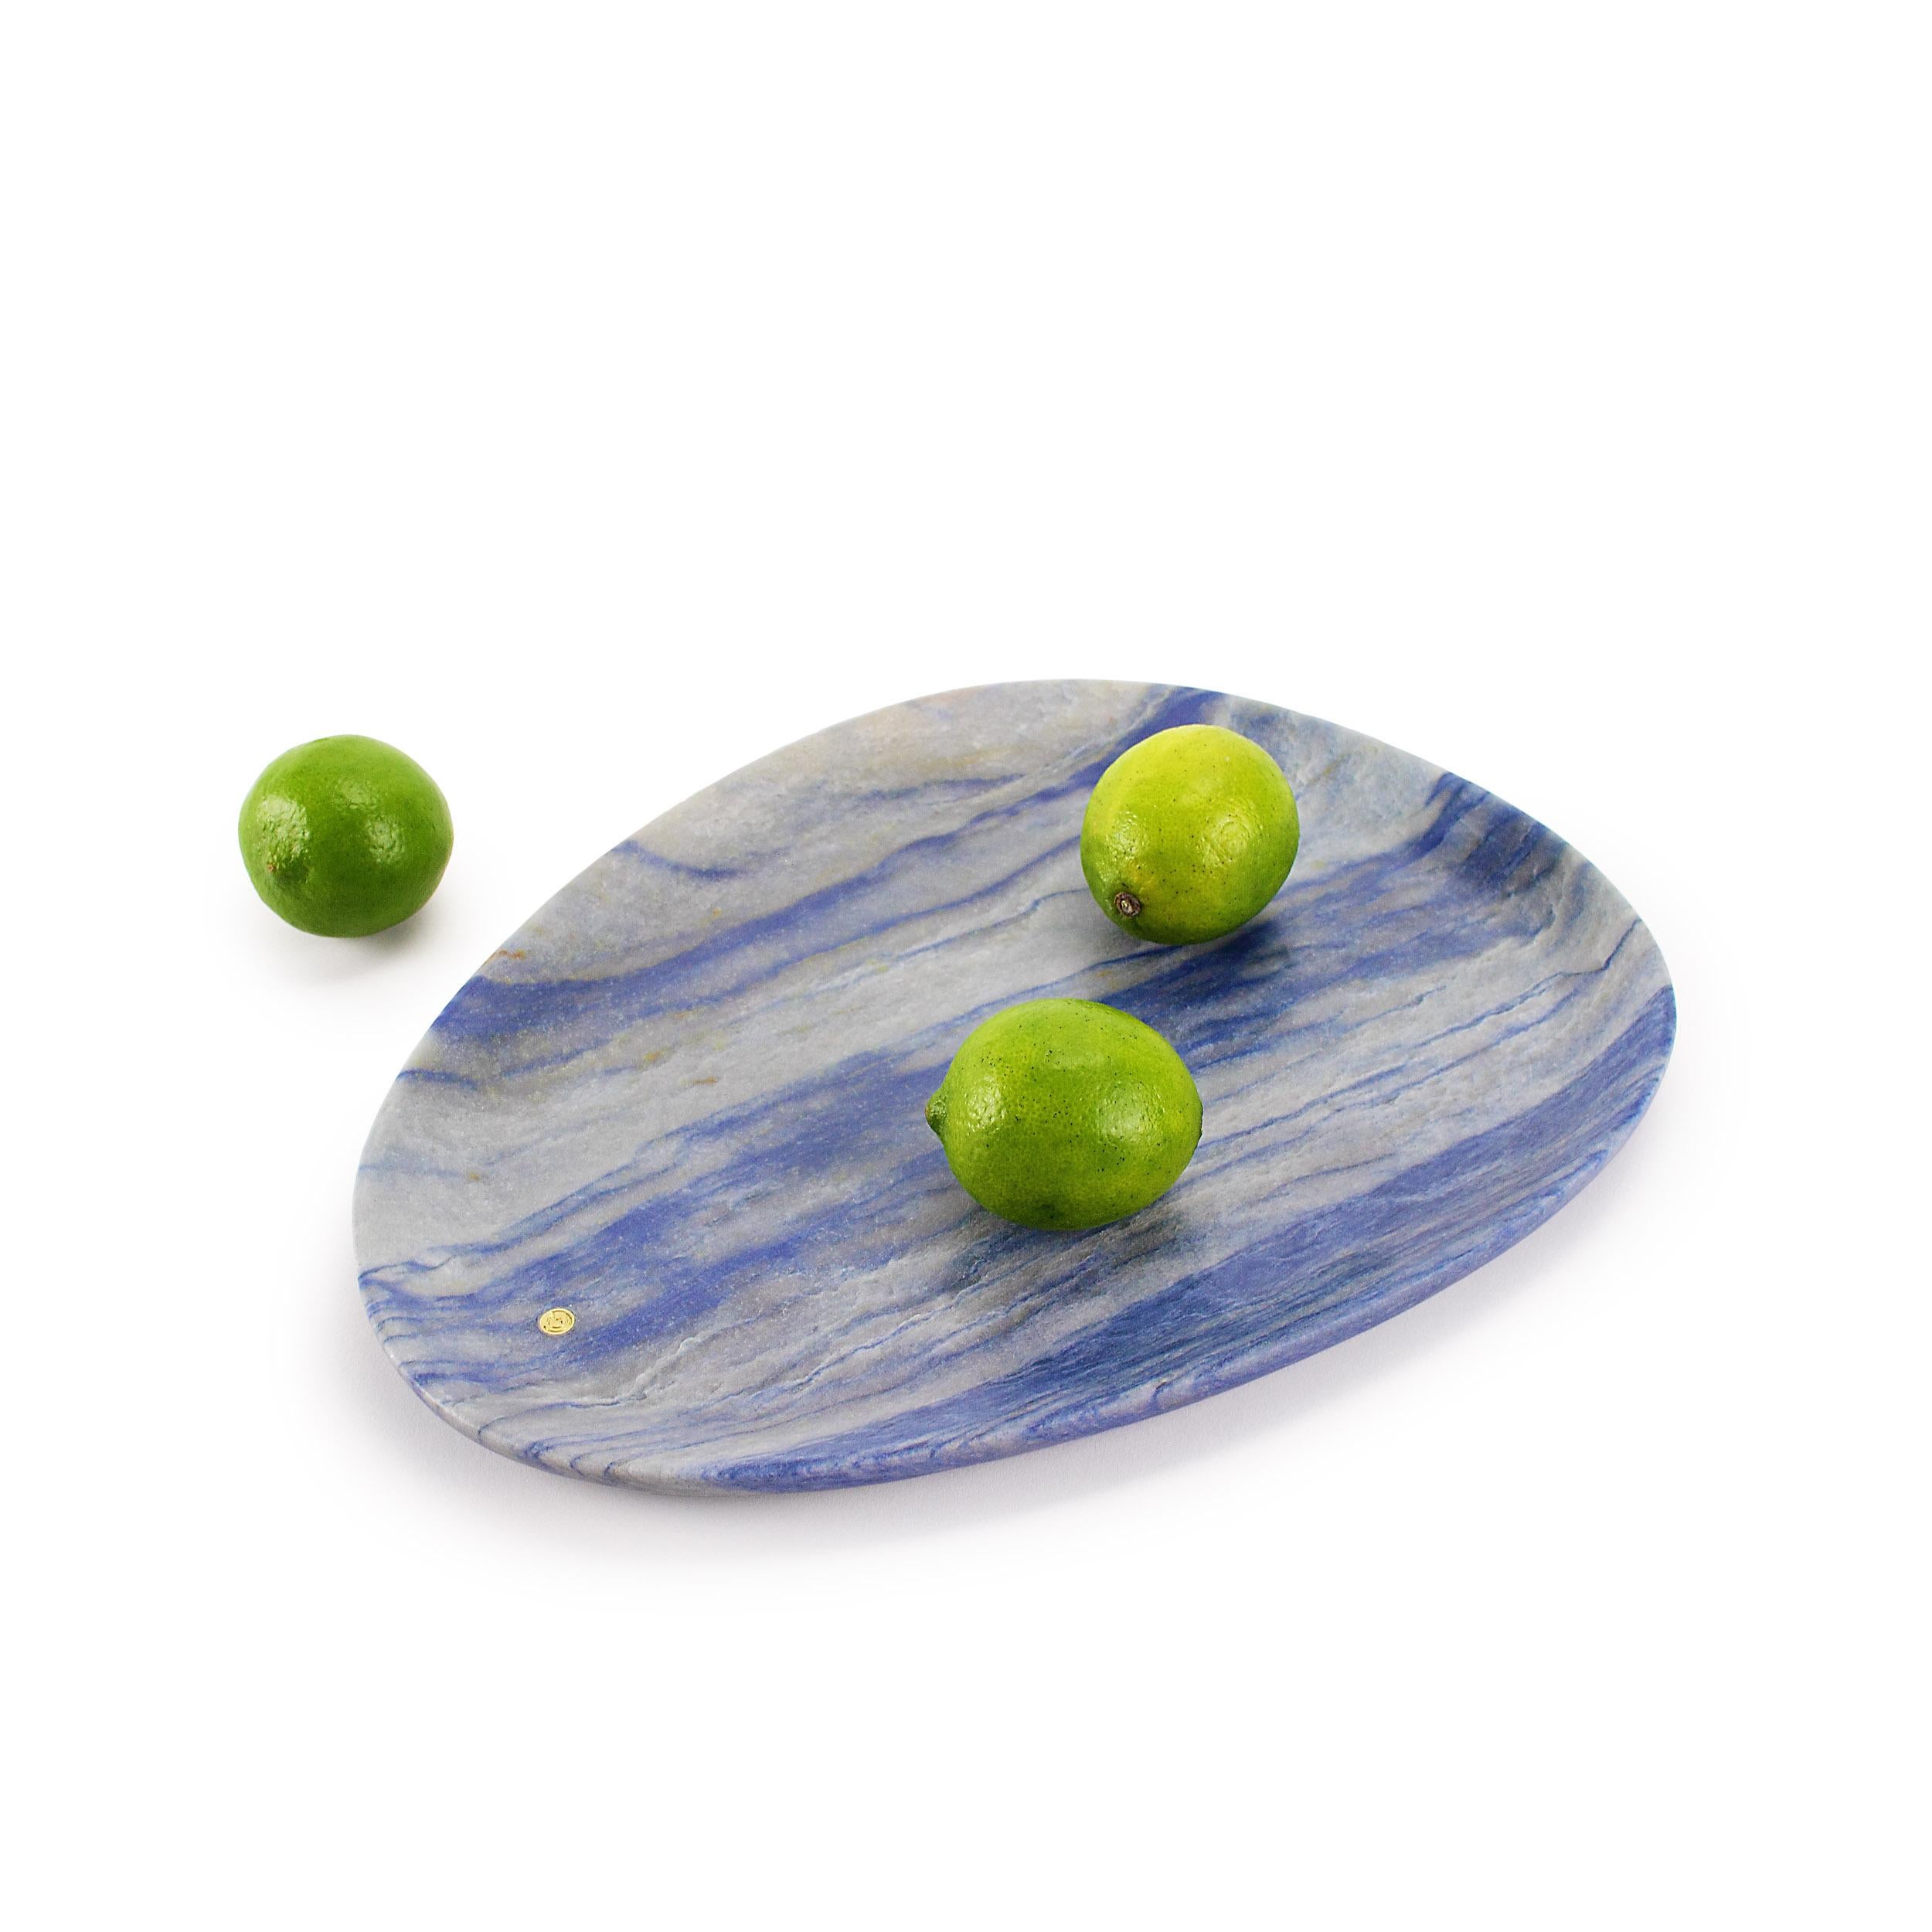 Hand carved presentation plate from semi-precious quartzite Azul Macaubas.
Multiple use as plates, platters and placers. 

Dimensions: Medium L 30, W 28, H 1.8 cm, also available: Big L 36, W 35, H 1.8 cm, small L 24, W 20, H 1.8 cm.
Available in